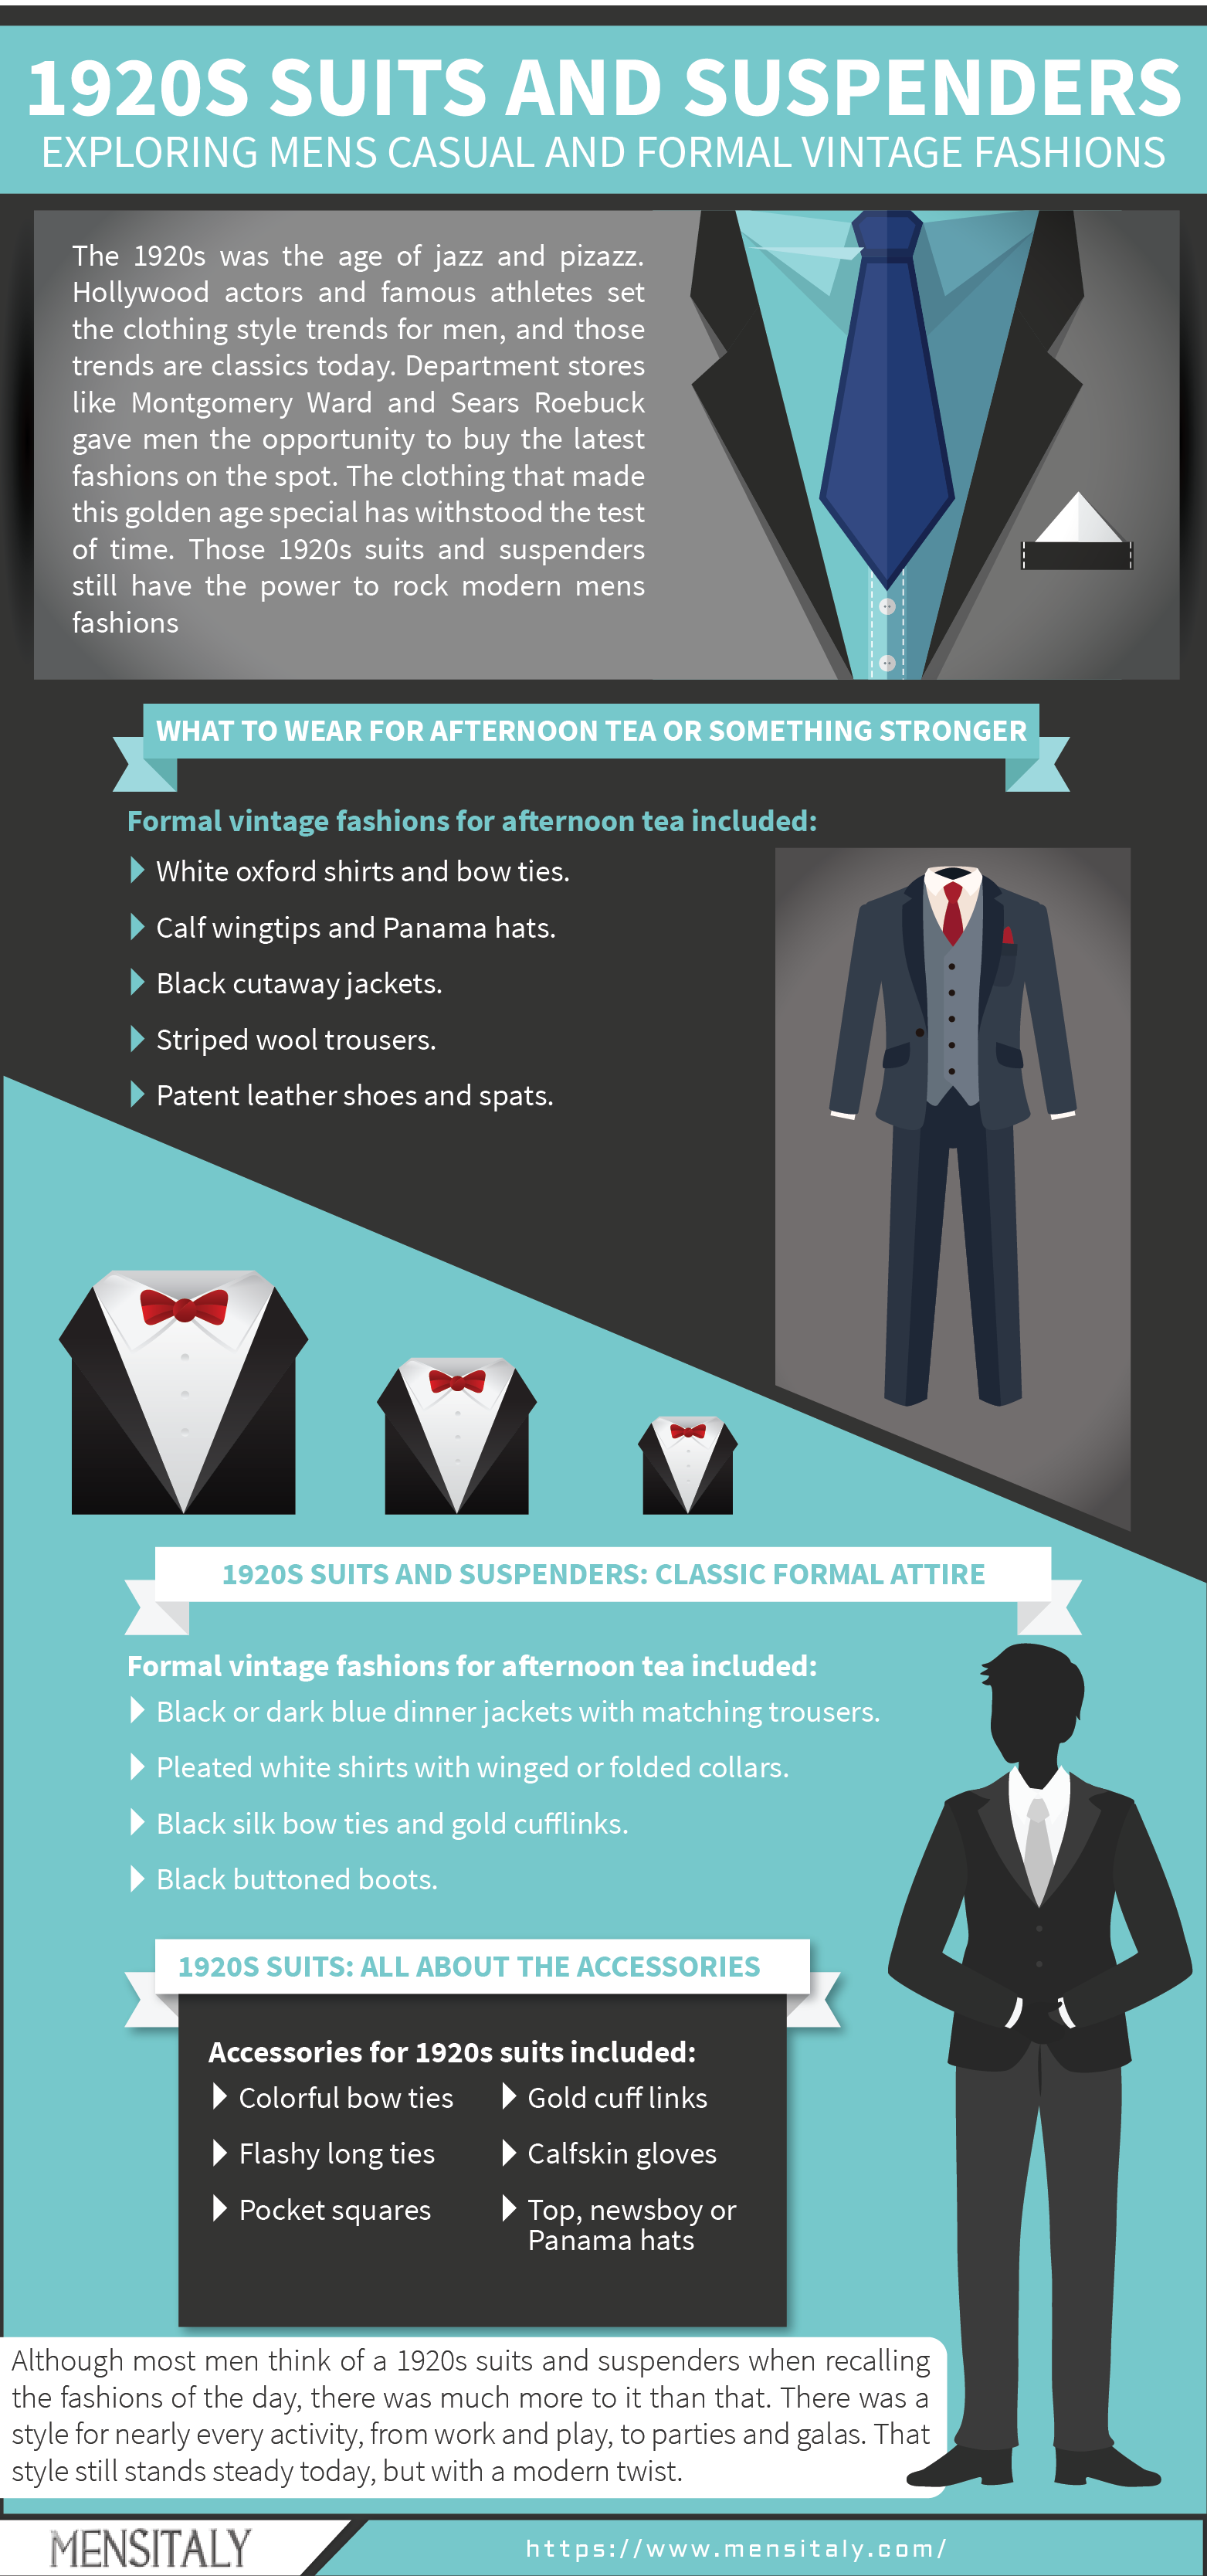 1920s Suits and Suspenders: Exploring Men's Casual and Formal Vintage Fashions